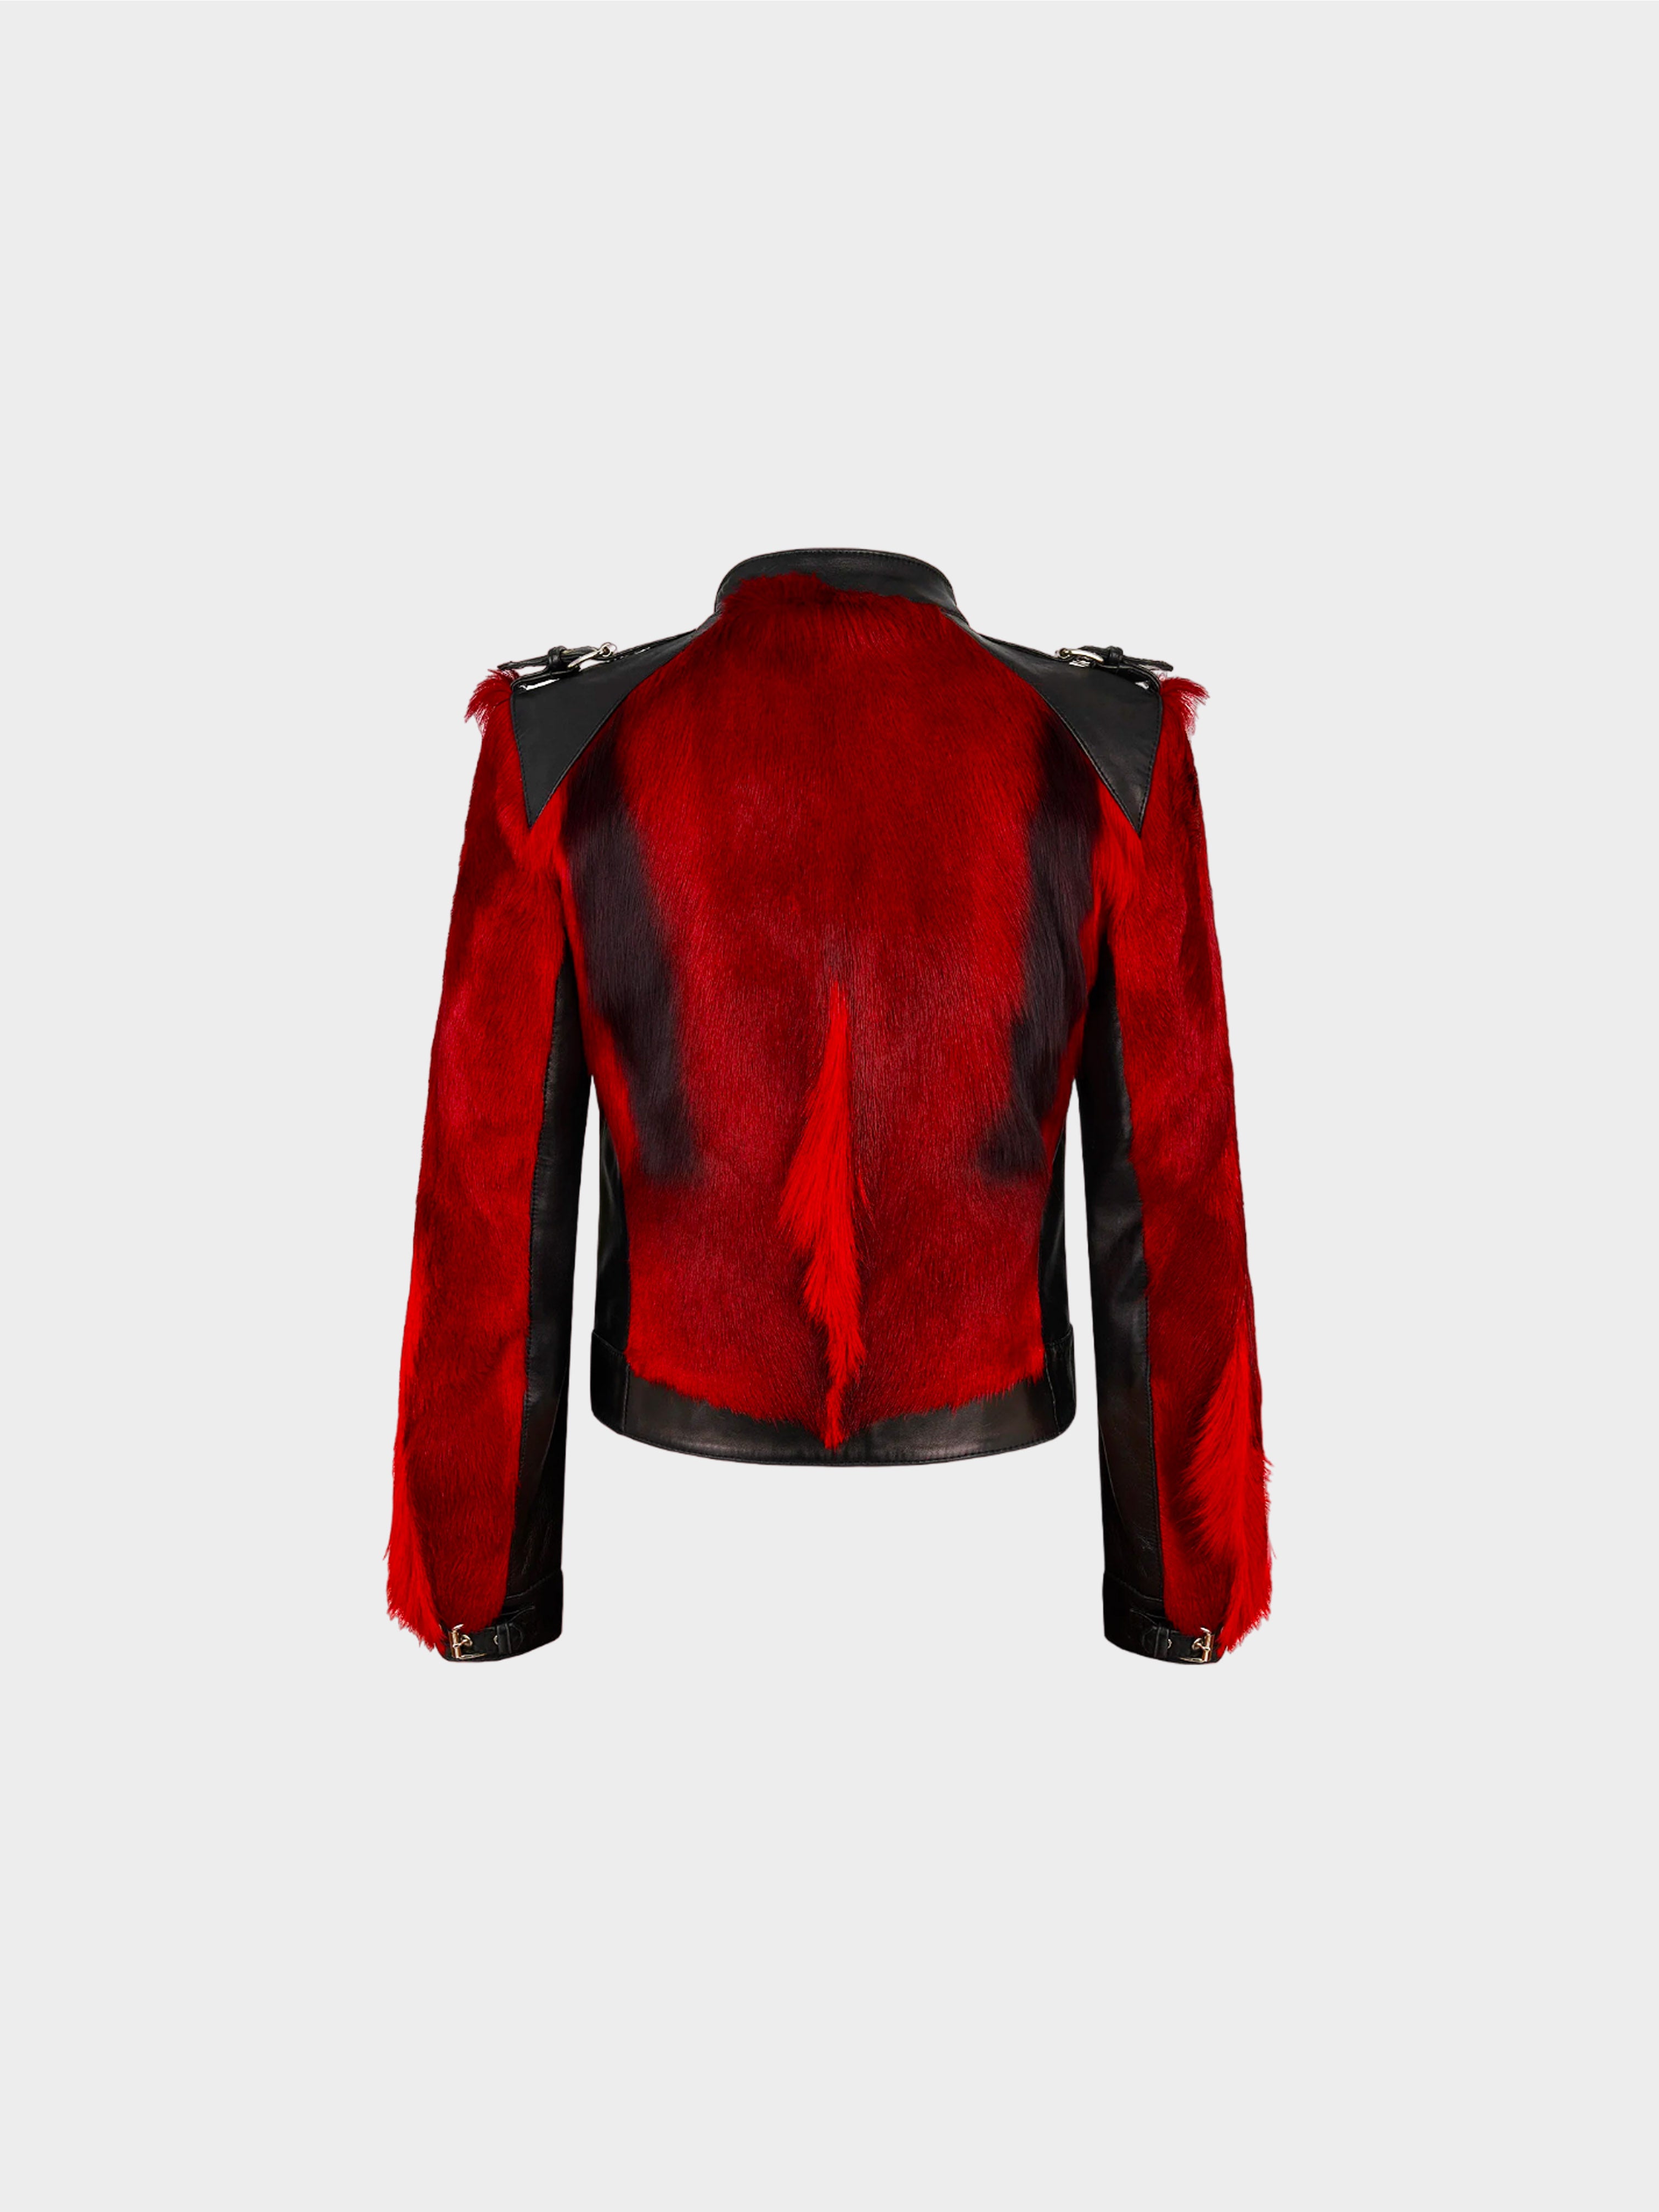 Dolce and Gabbana Fall 2001 Menswear Red Fur Leather Jacket